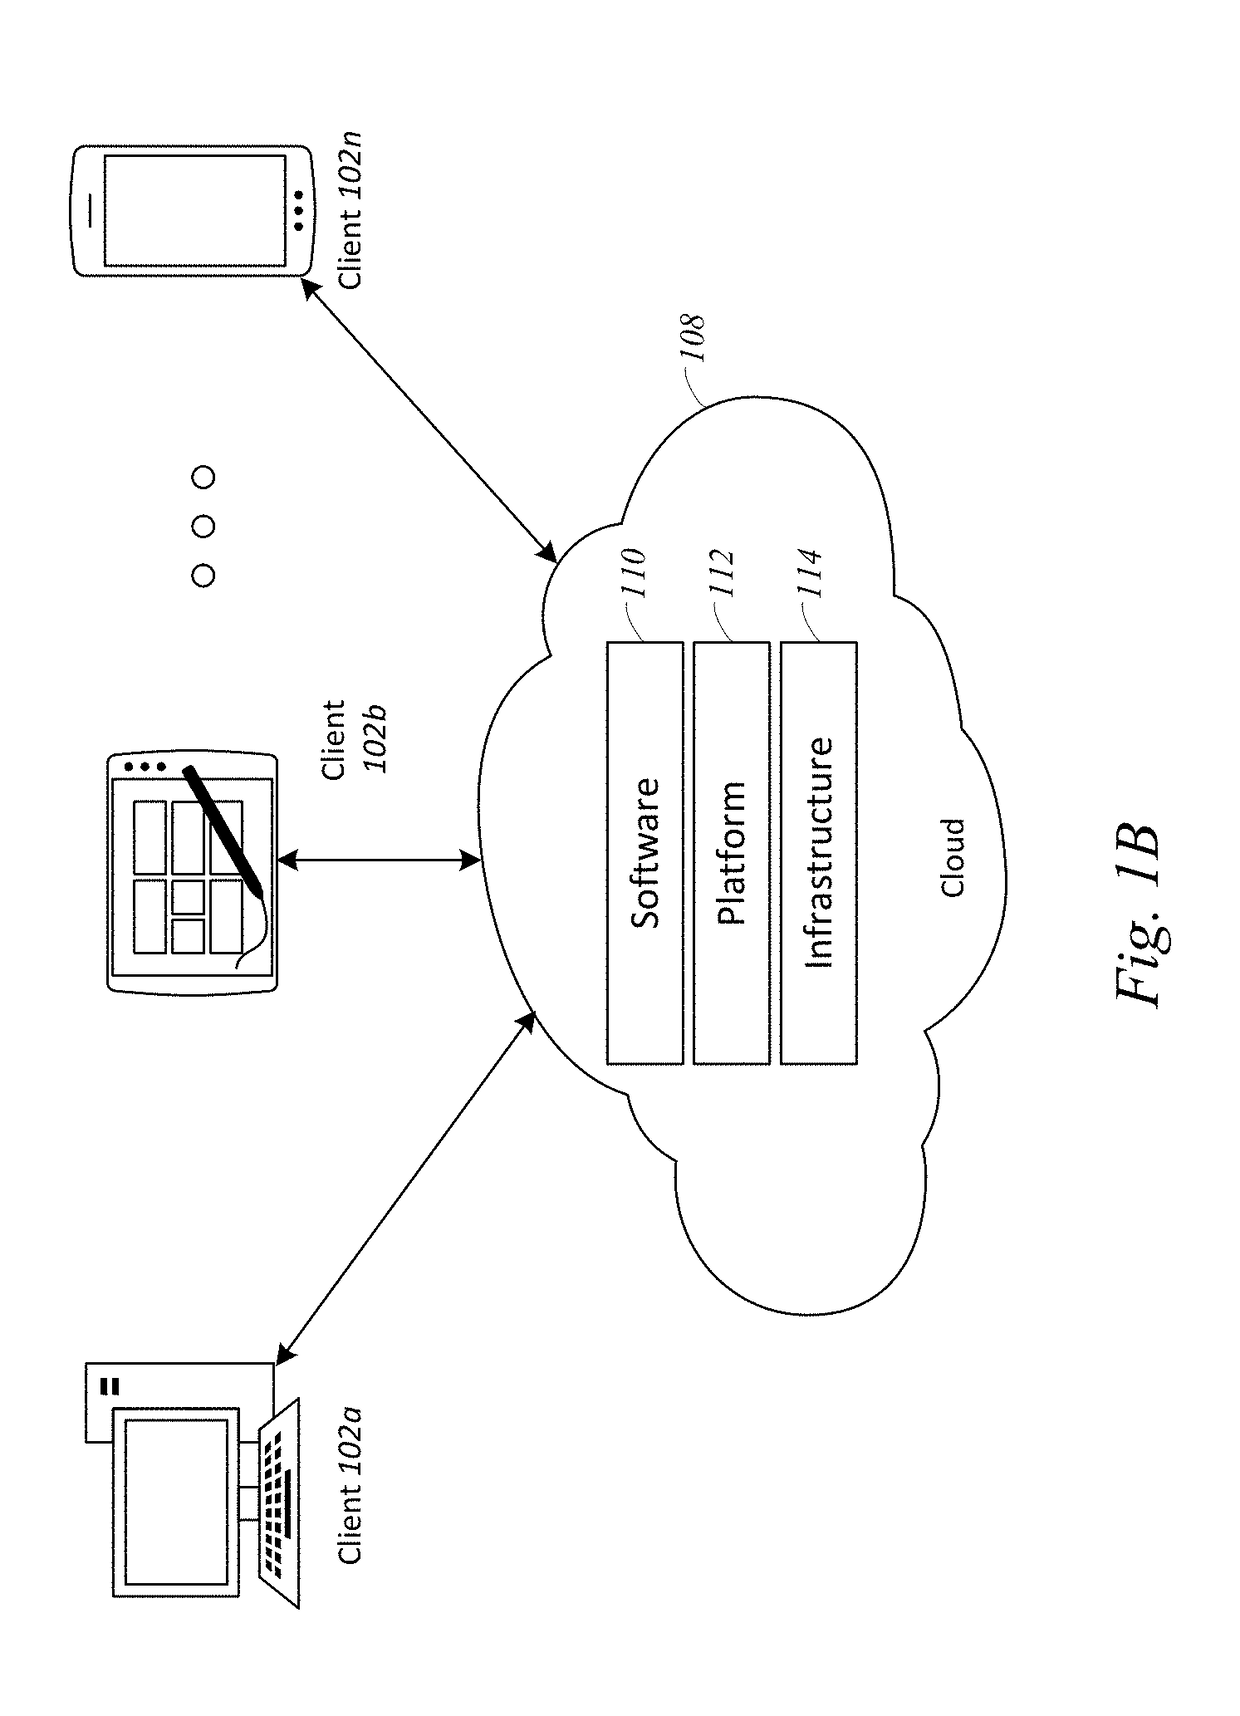 Systems and methods for creating and commissioning a security awareness program